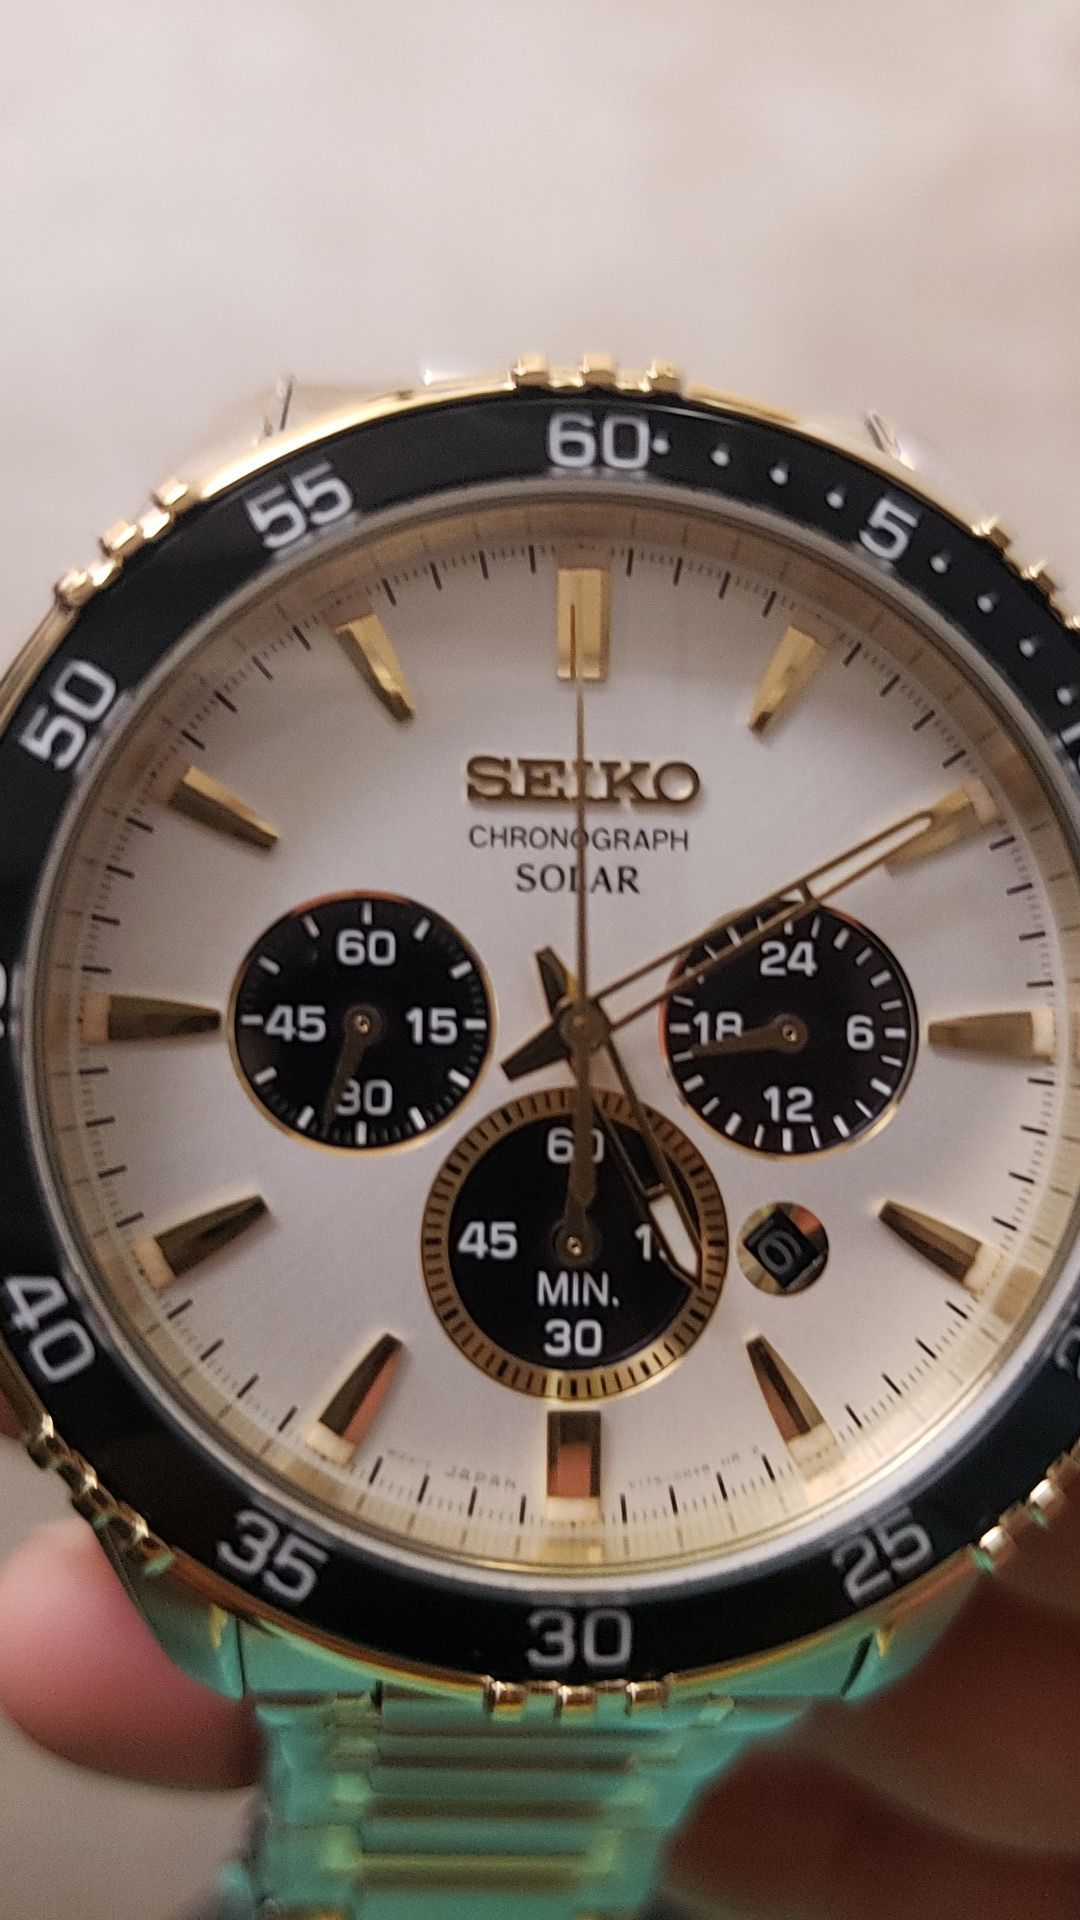 Seiko chronograph solar, water resistant 100 m brand new never used, no box